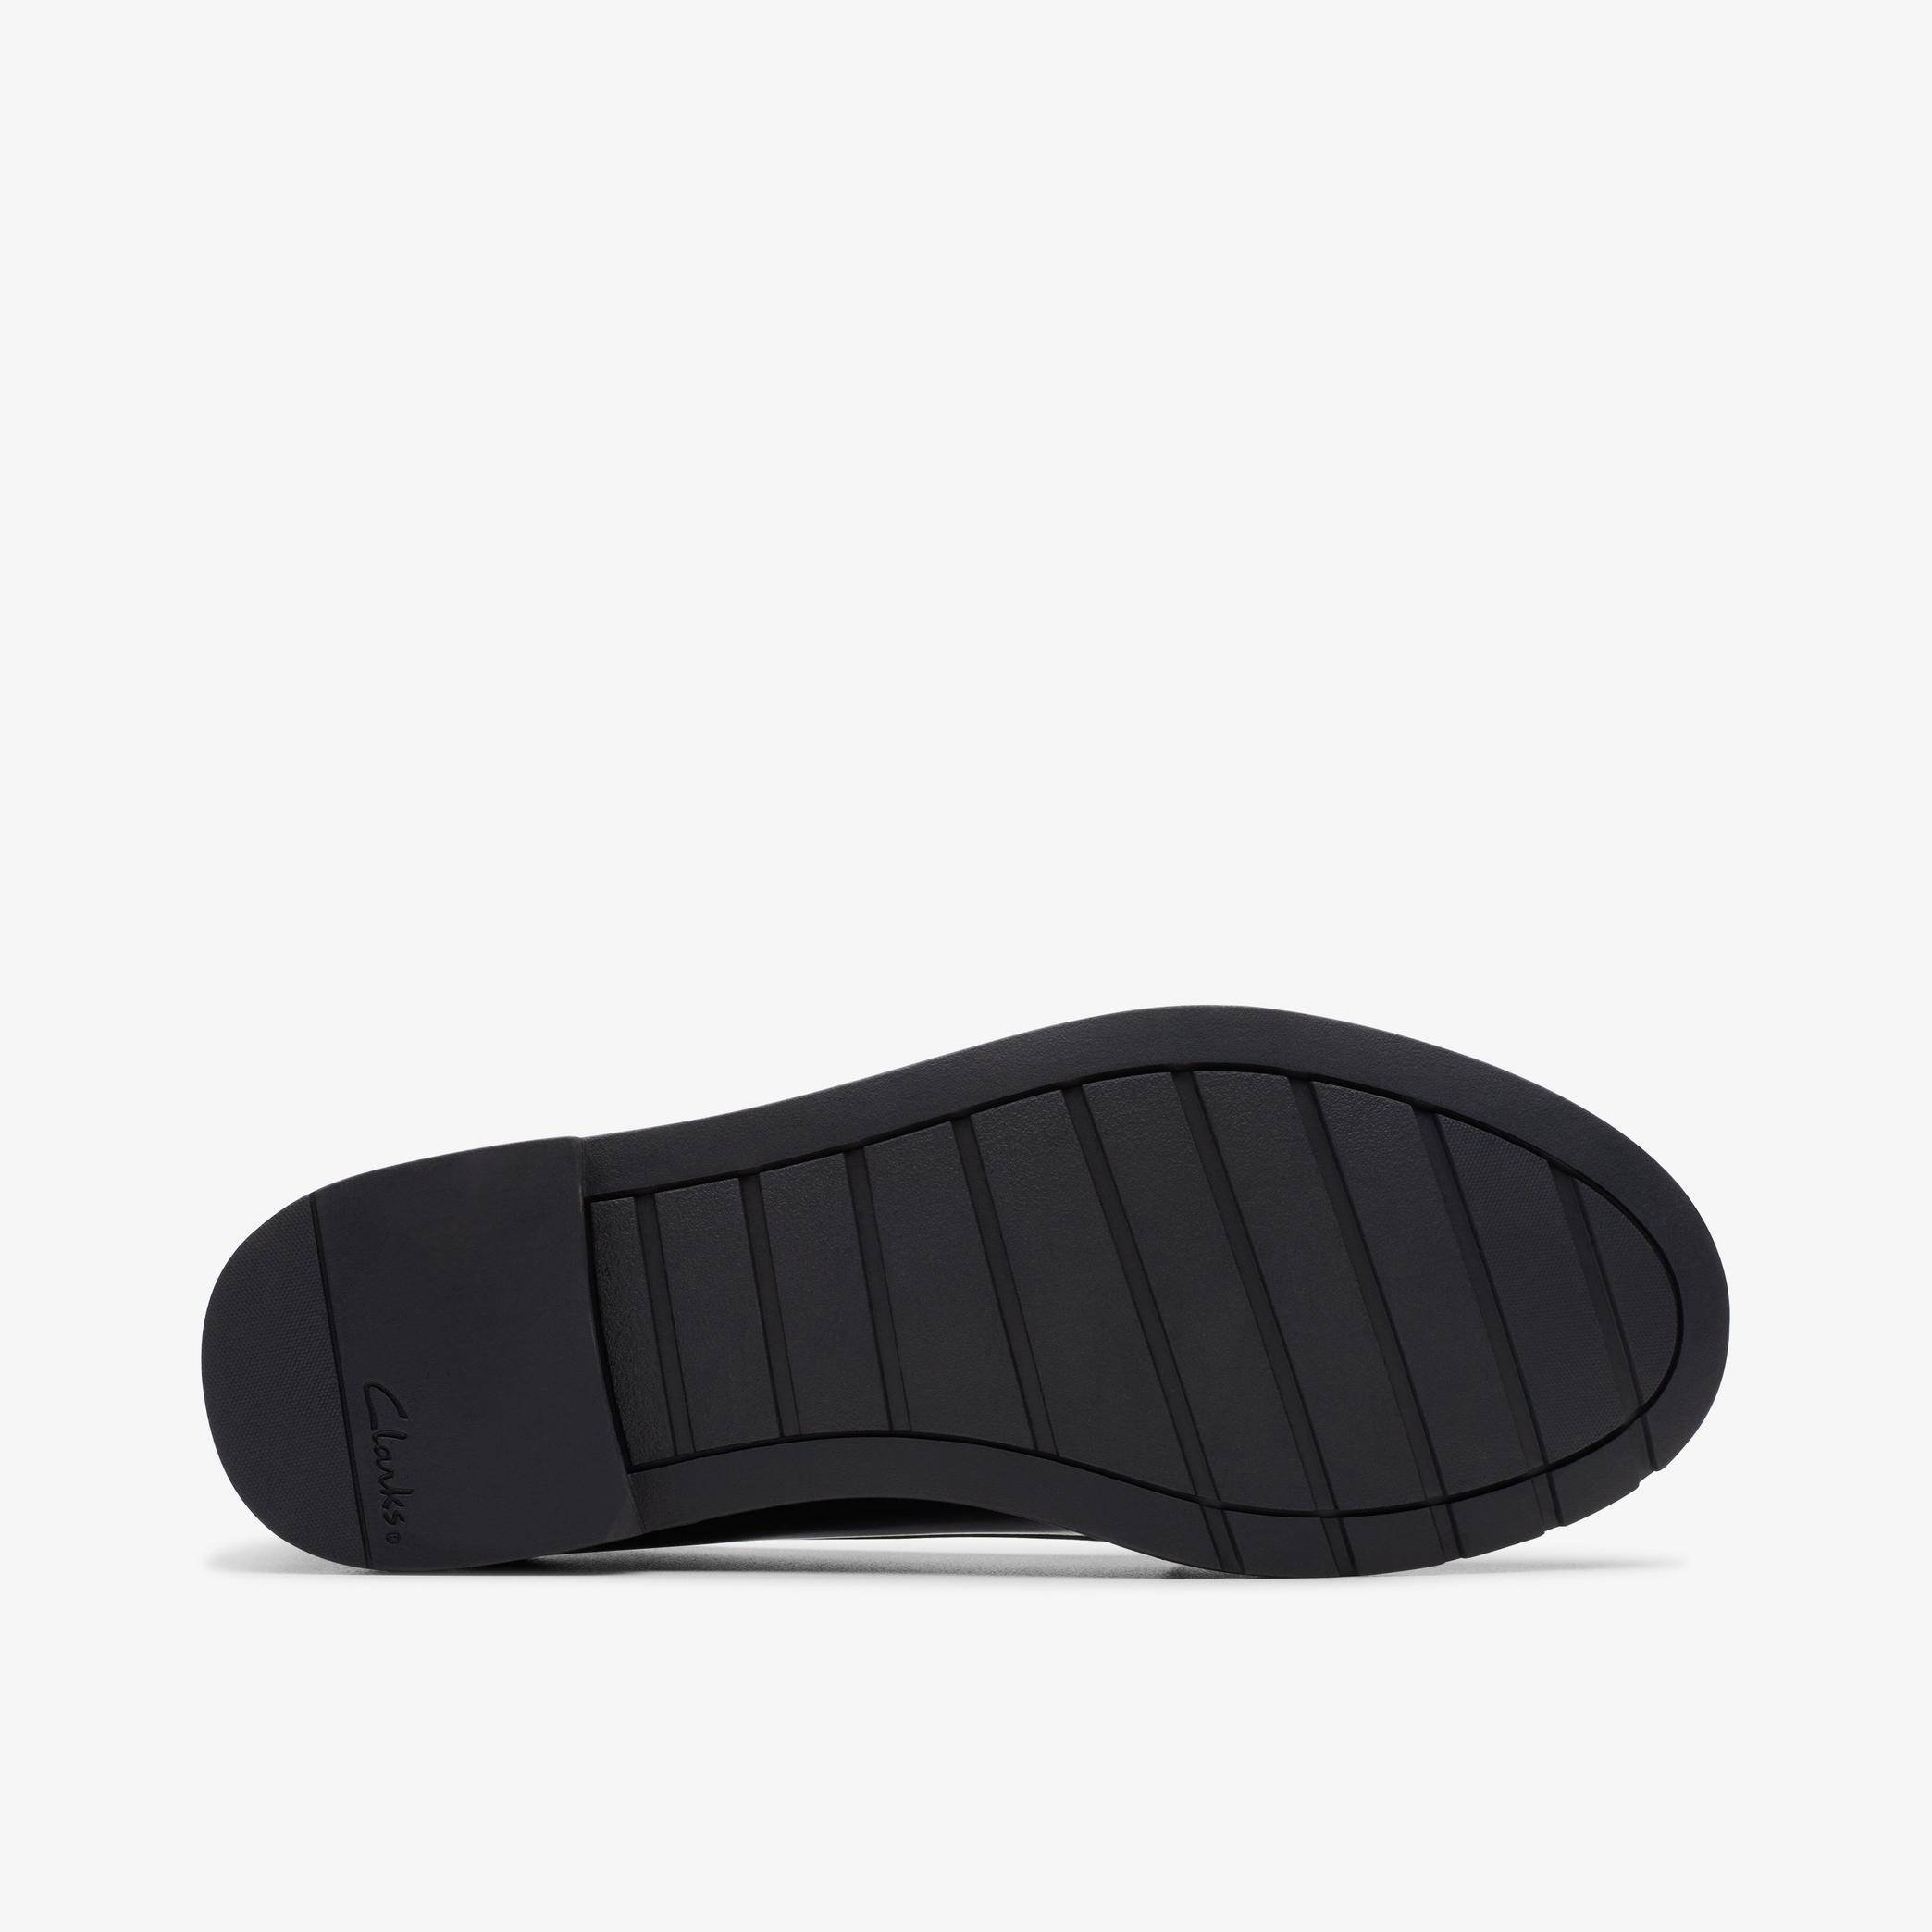 Kids Scala Loafer Youth Black Patent Shoes | Clarks UK